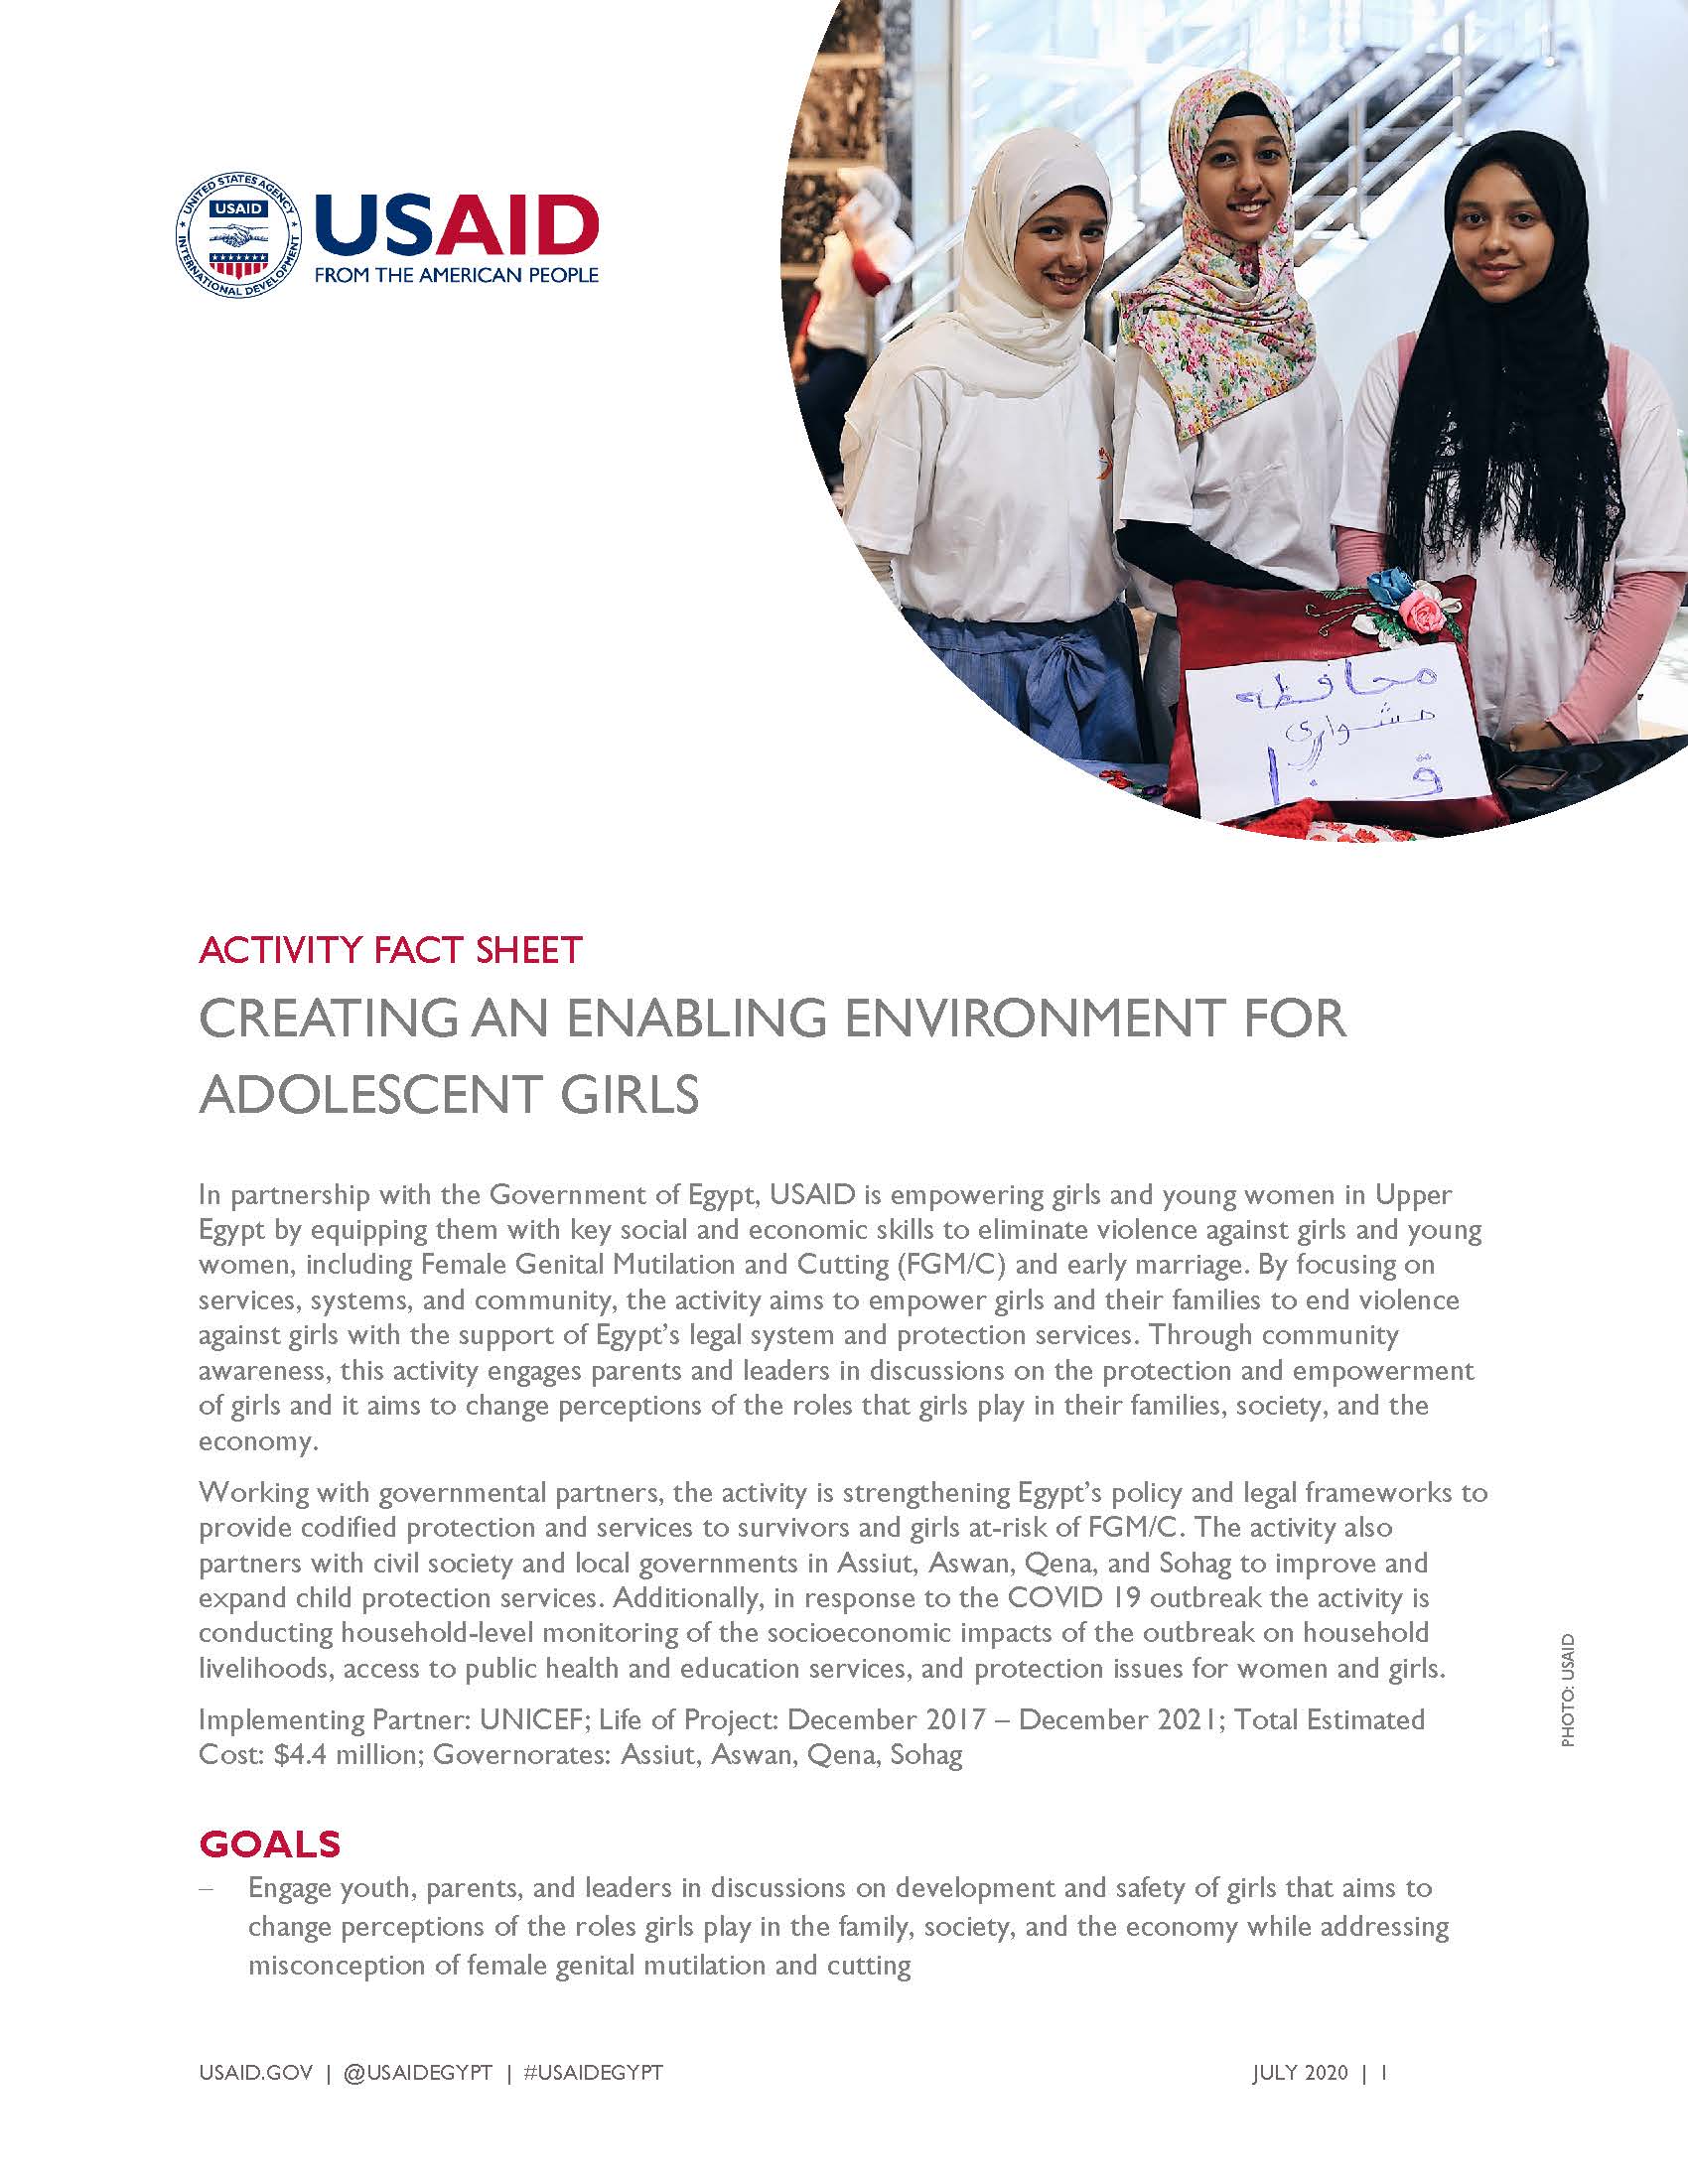 USAID/Egypt Activity Fact Sheet: Creating an Enabling Environment for Adolescent Girls